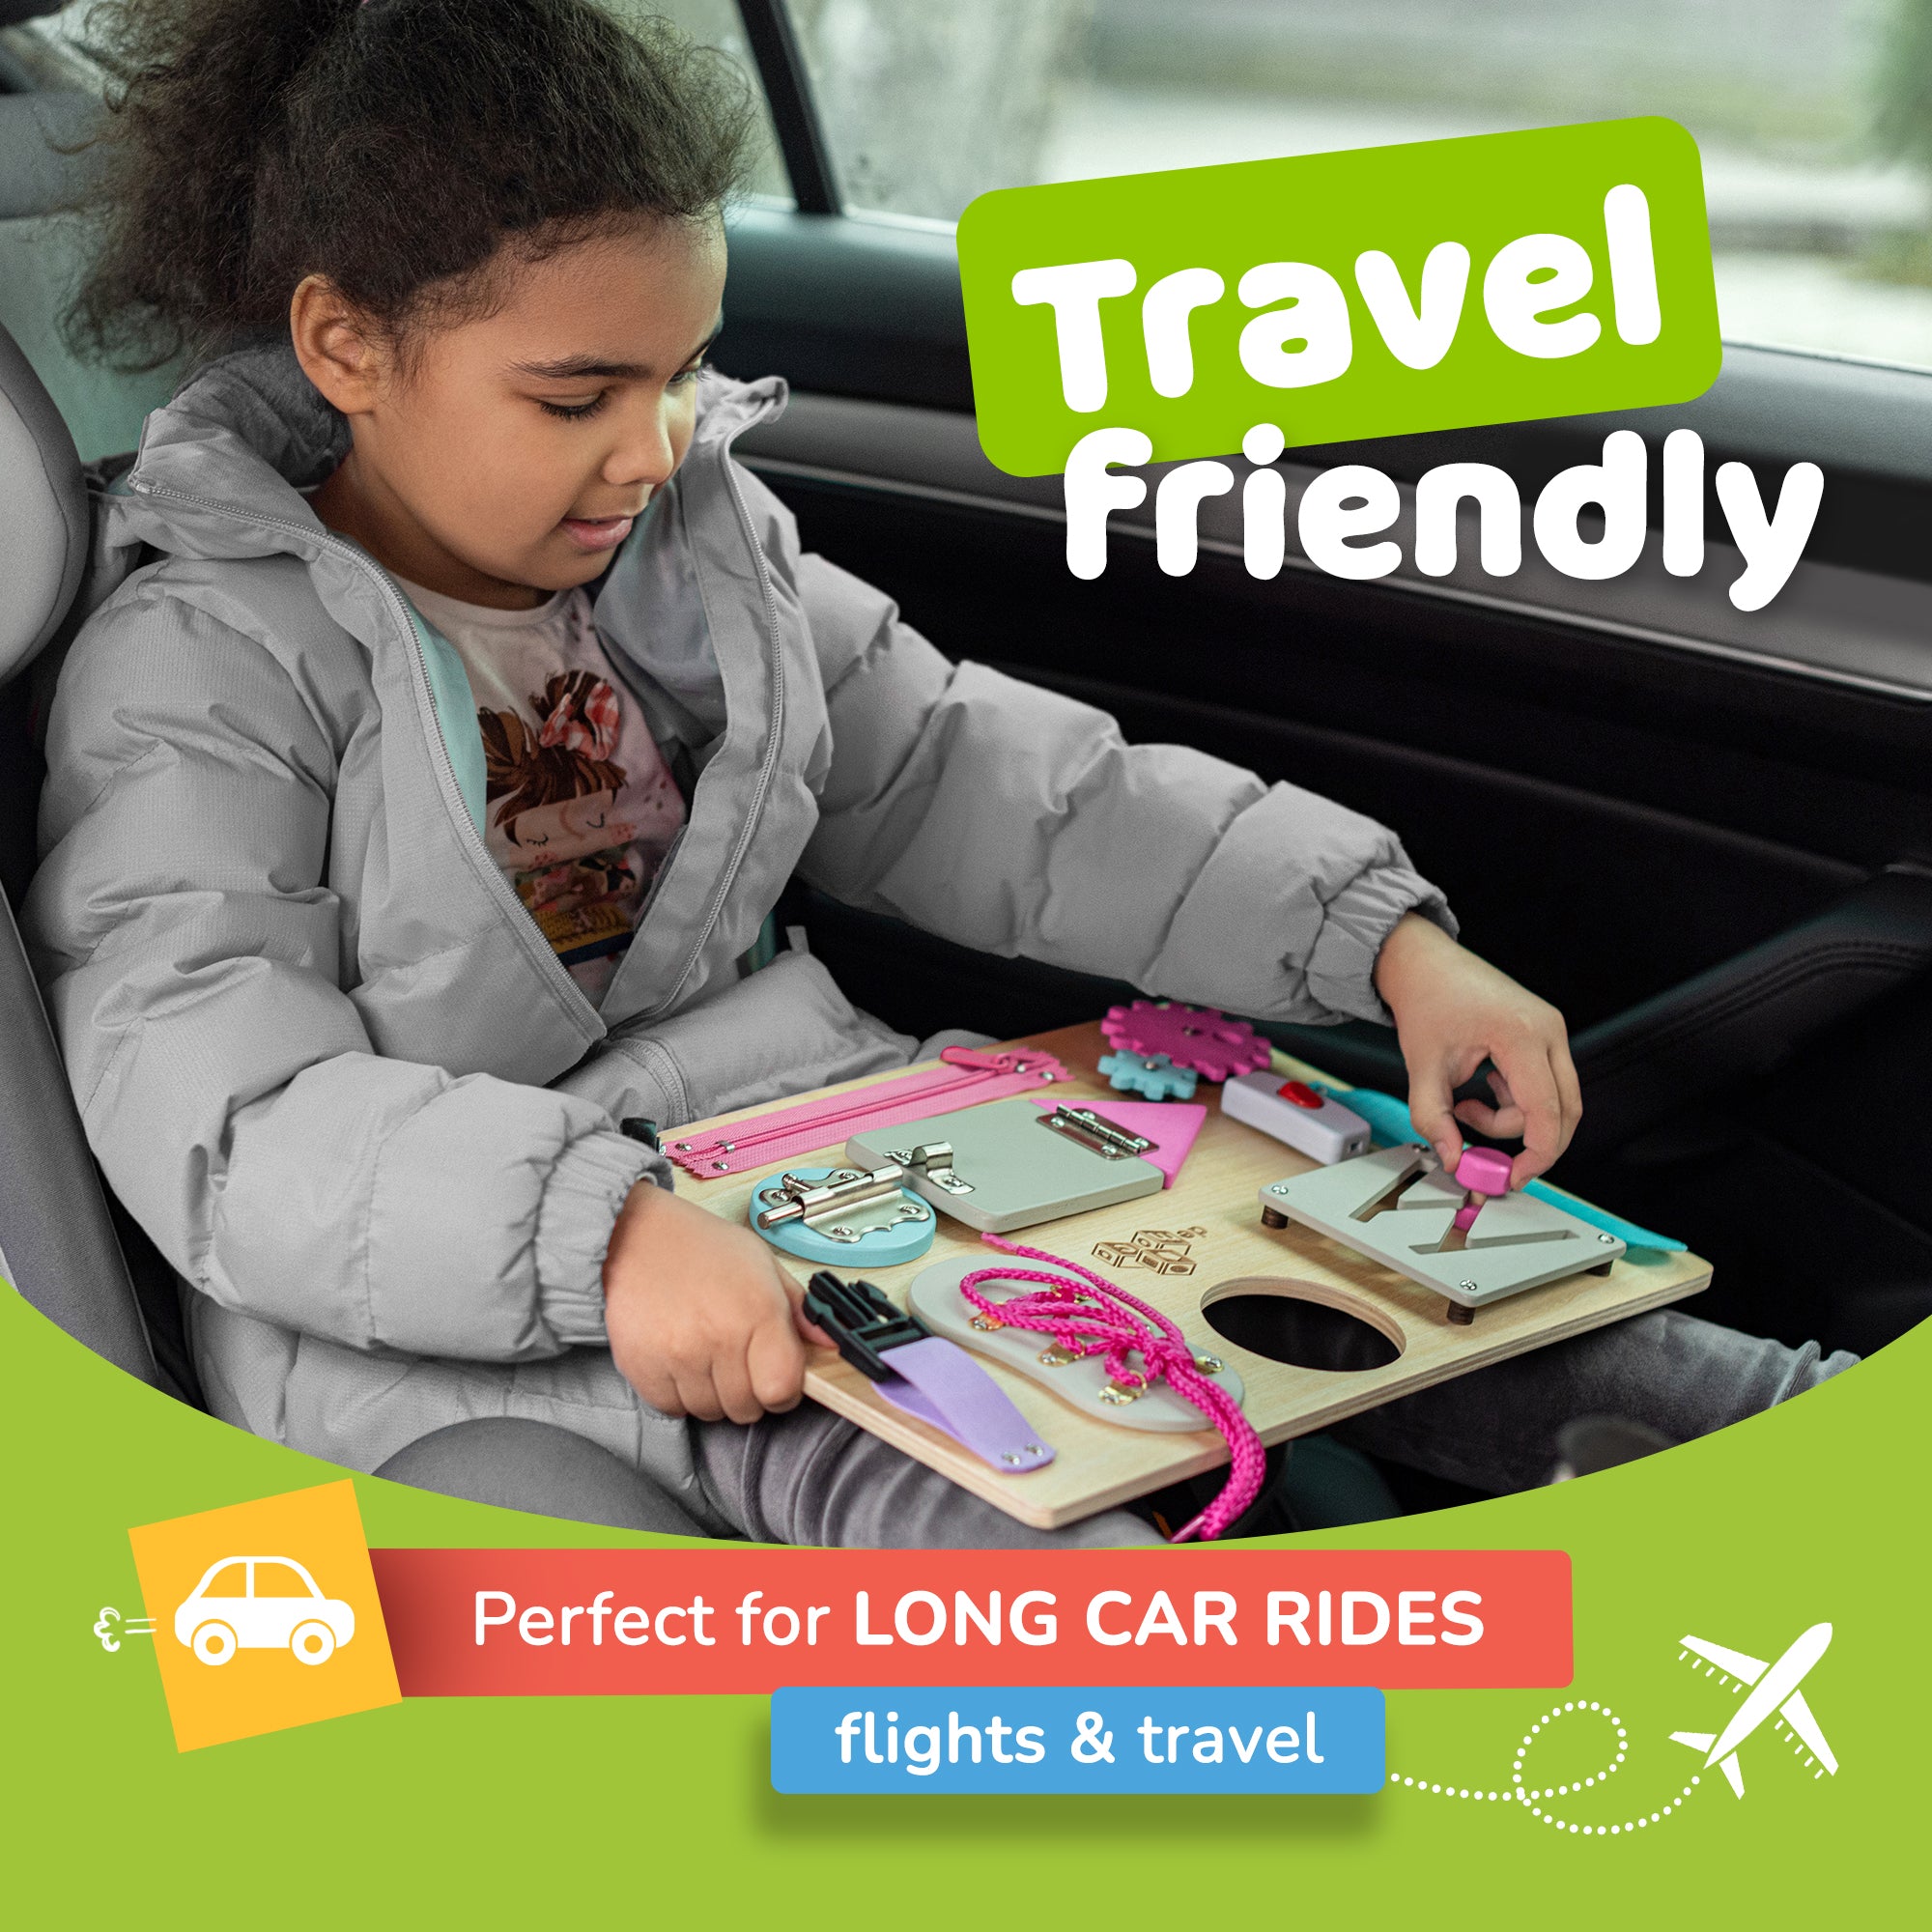  Busy Board Toddler Travel Toys: Sensory Toys for